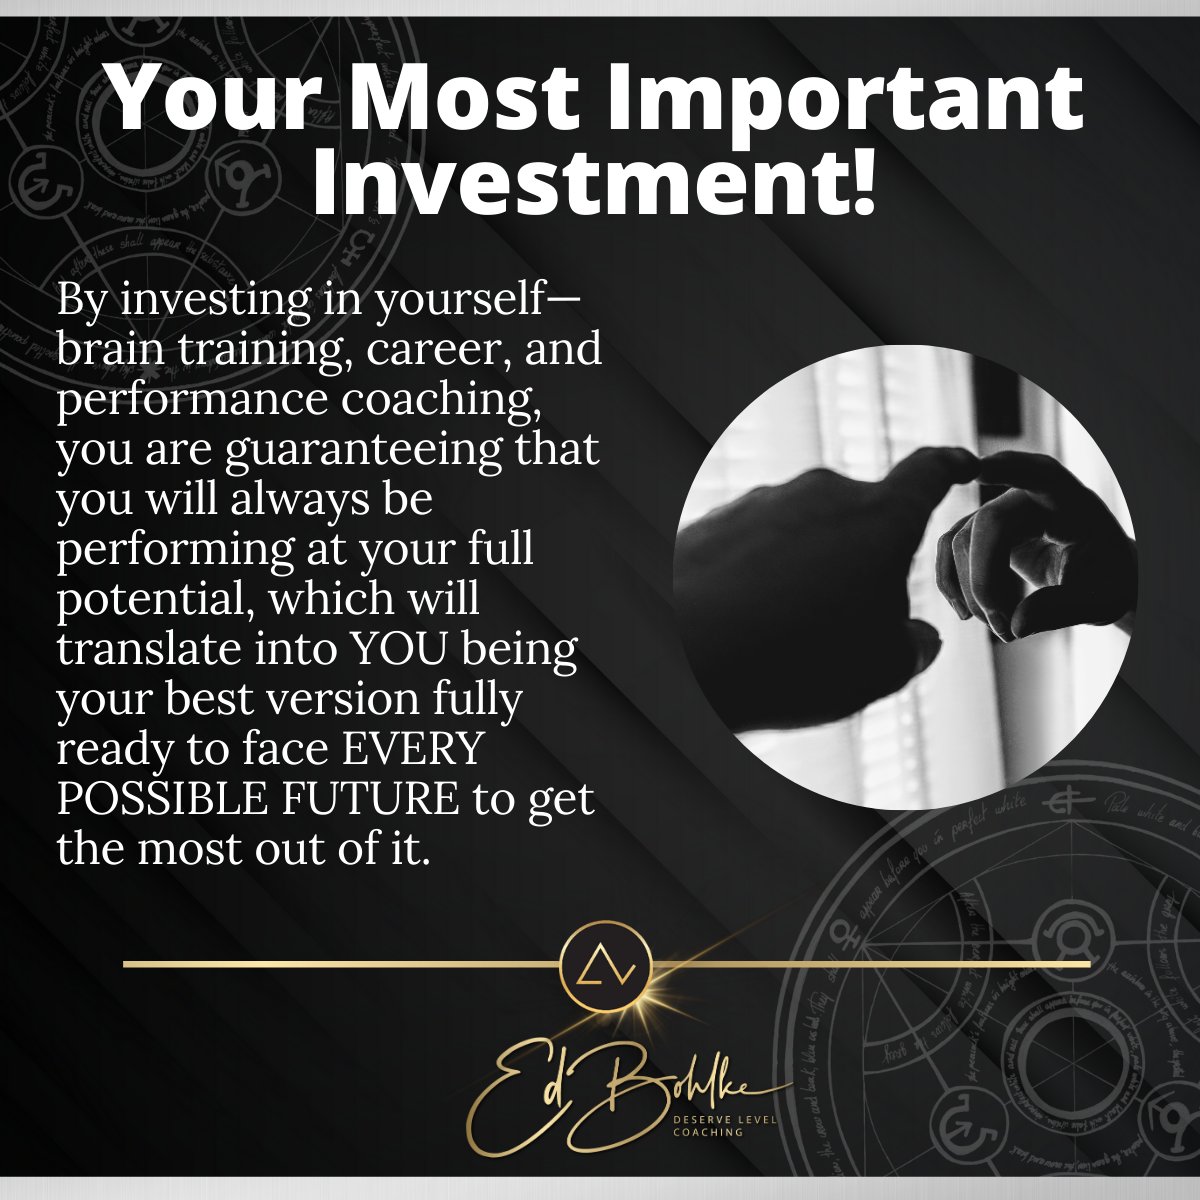 By investing in YOURSELF you become bigger than every possible obstacle in your way.

#DerveLevel #PerformanceCoach #Coaching #FullPotential #ComfortZone #Action #Plan #SelfRealization #SelfImprovement #SelfDiscipline #Goals #Success #Evolution #Learning #Growth #RadicalResults